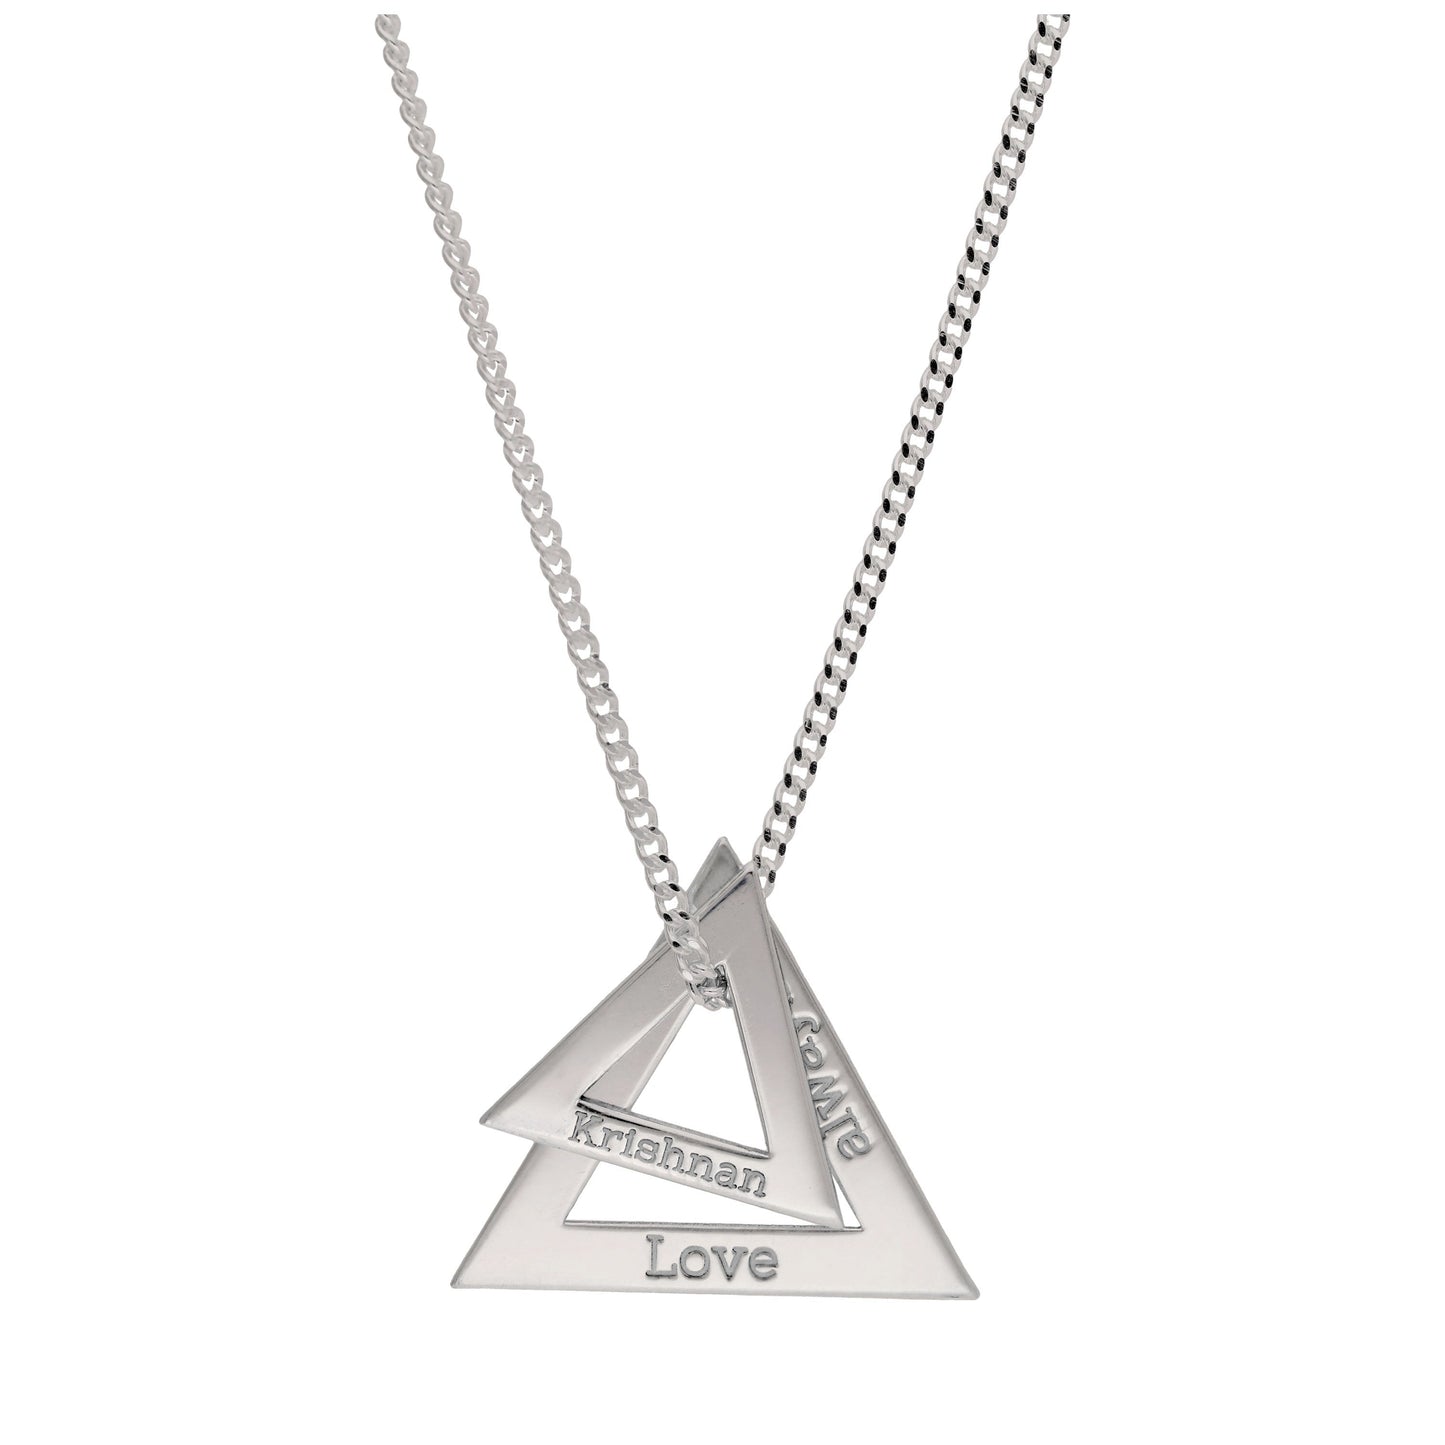 Bespoke Sterling Silver Double Triangle Name Necklace 16 - 28 Inches